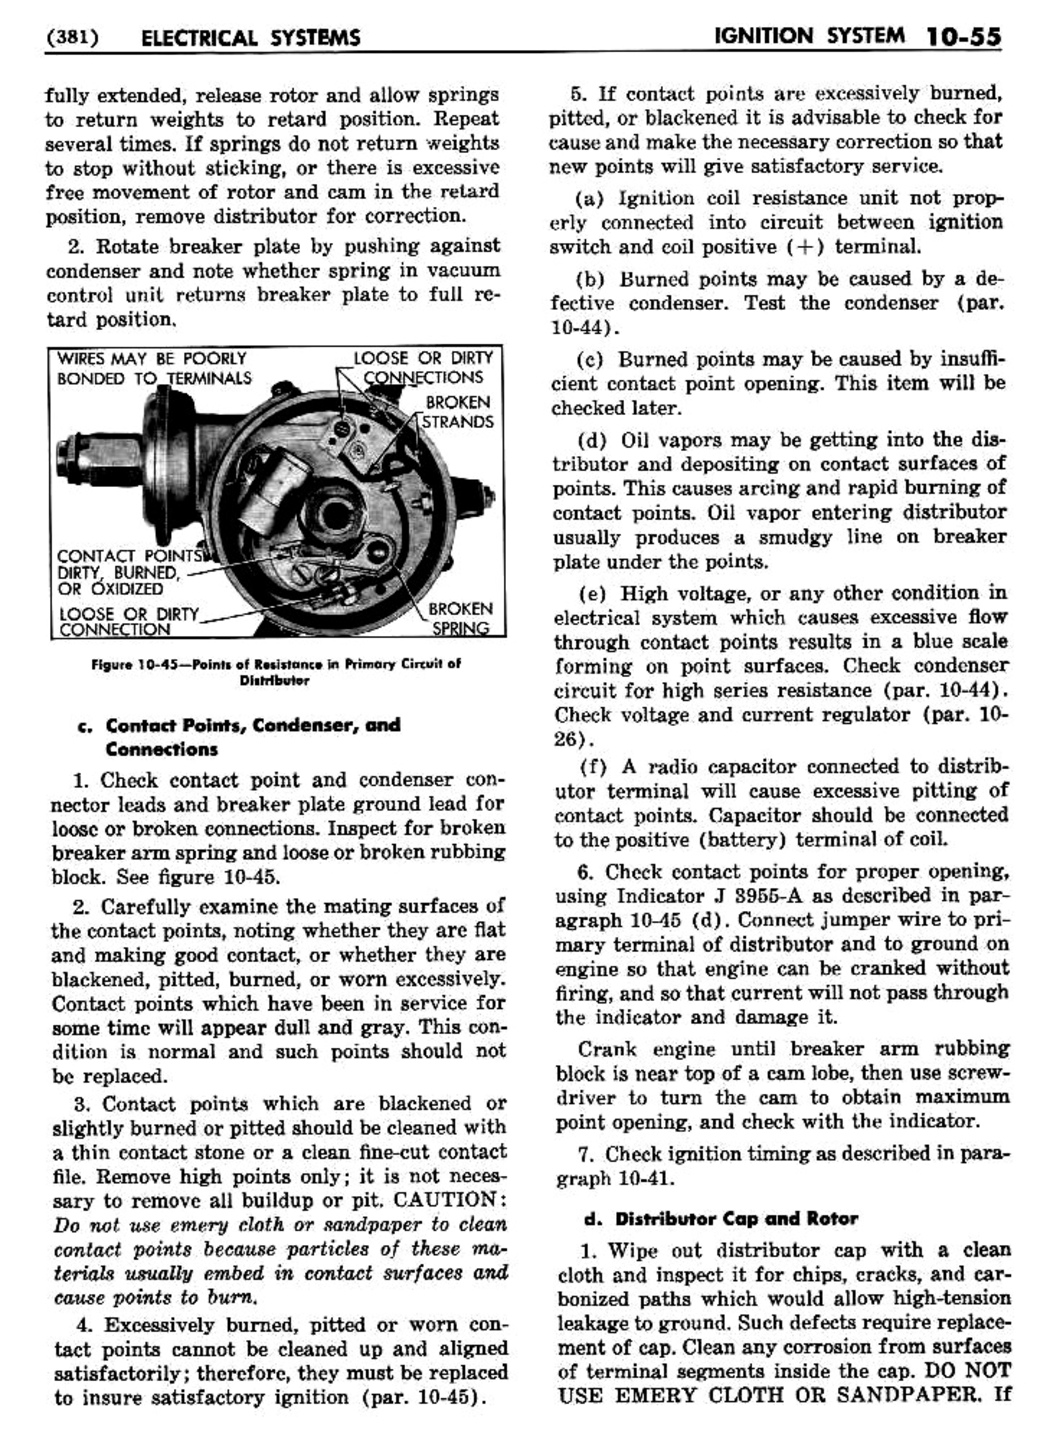 n_11 1956 Buick Shop Manual - Electrical Systems-055-055.jpg